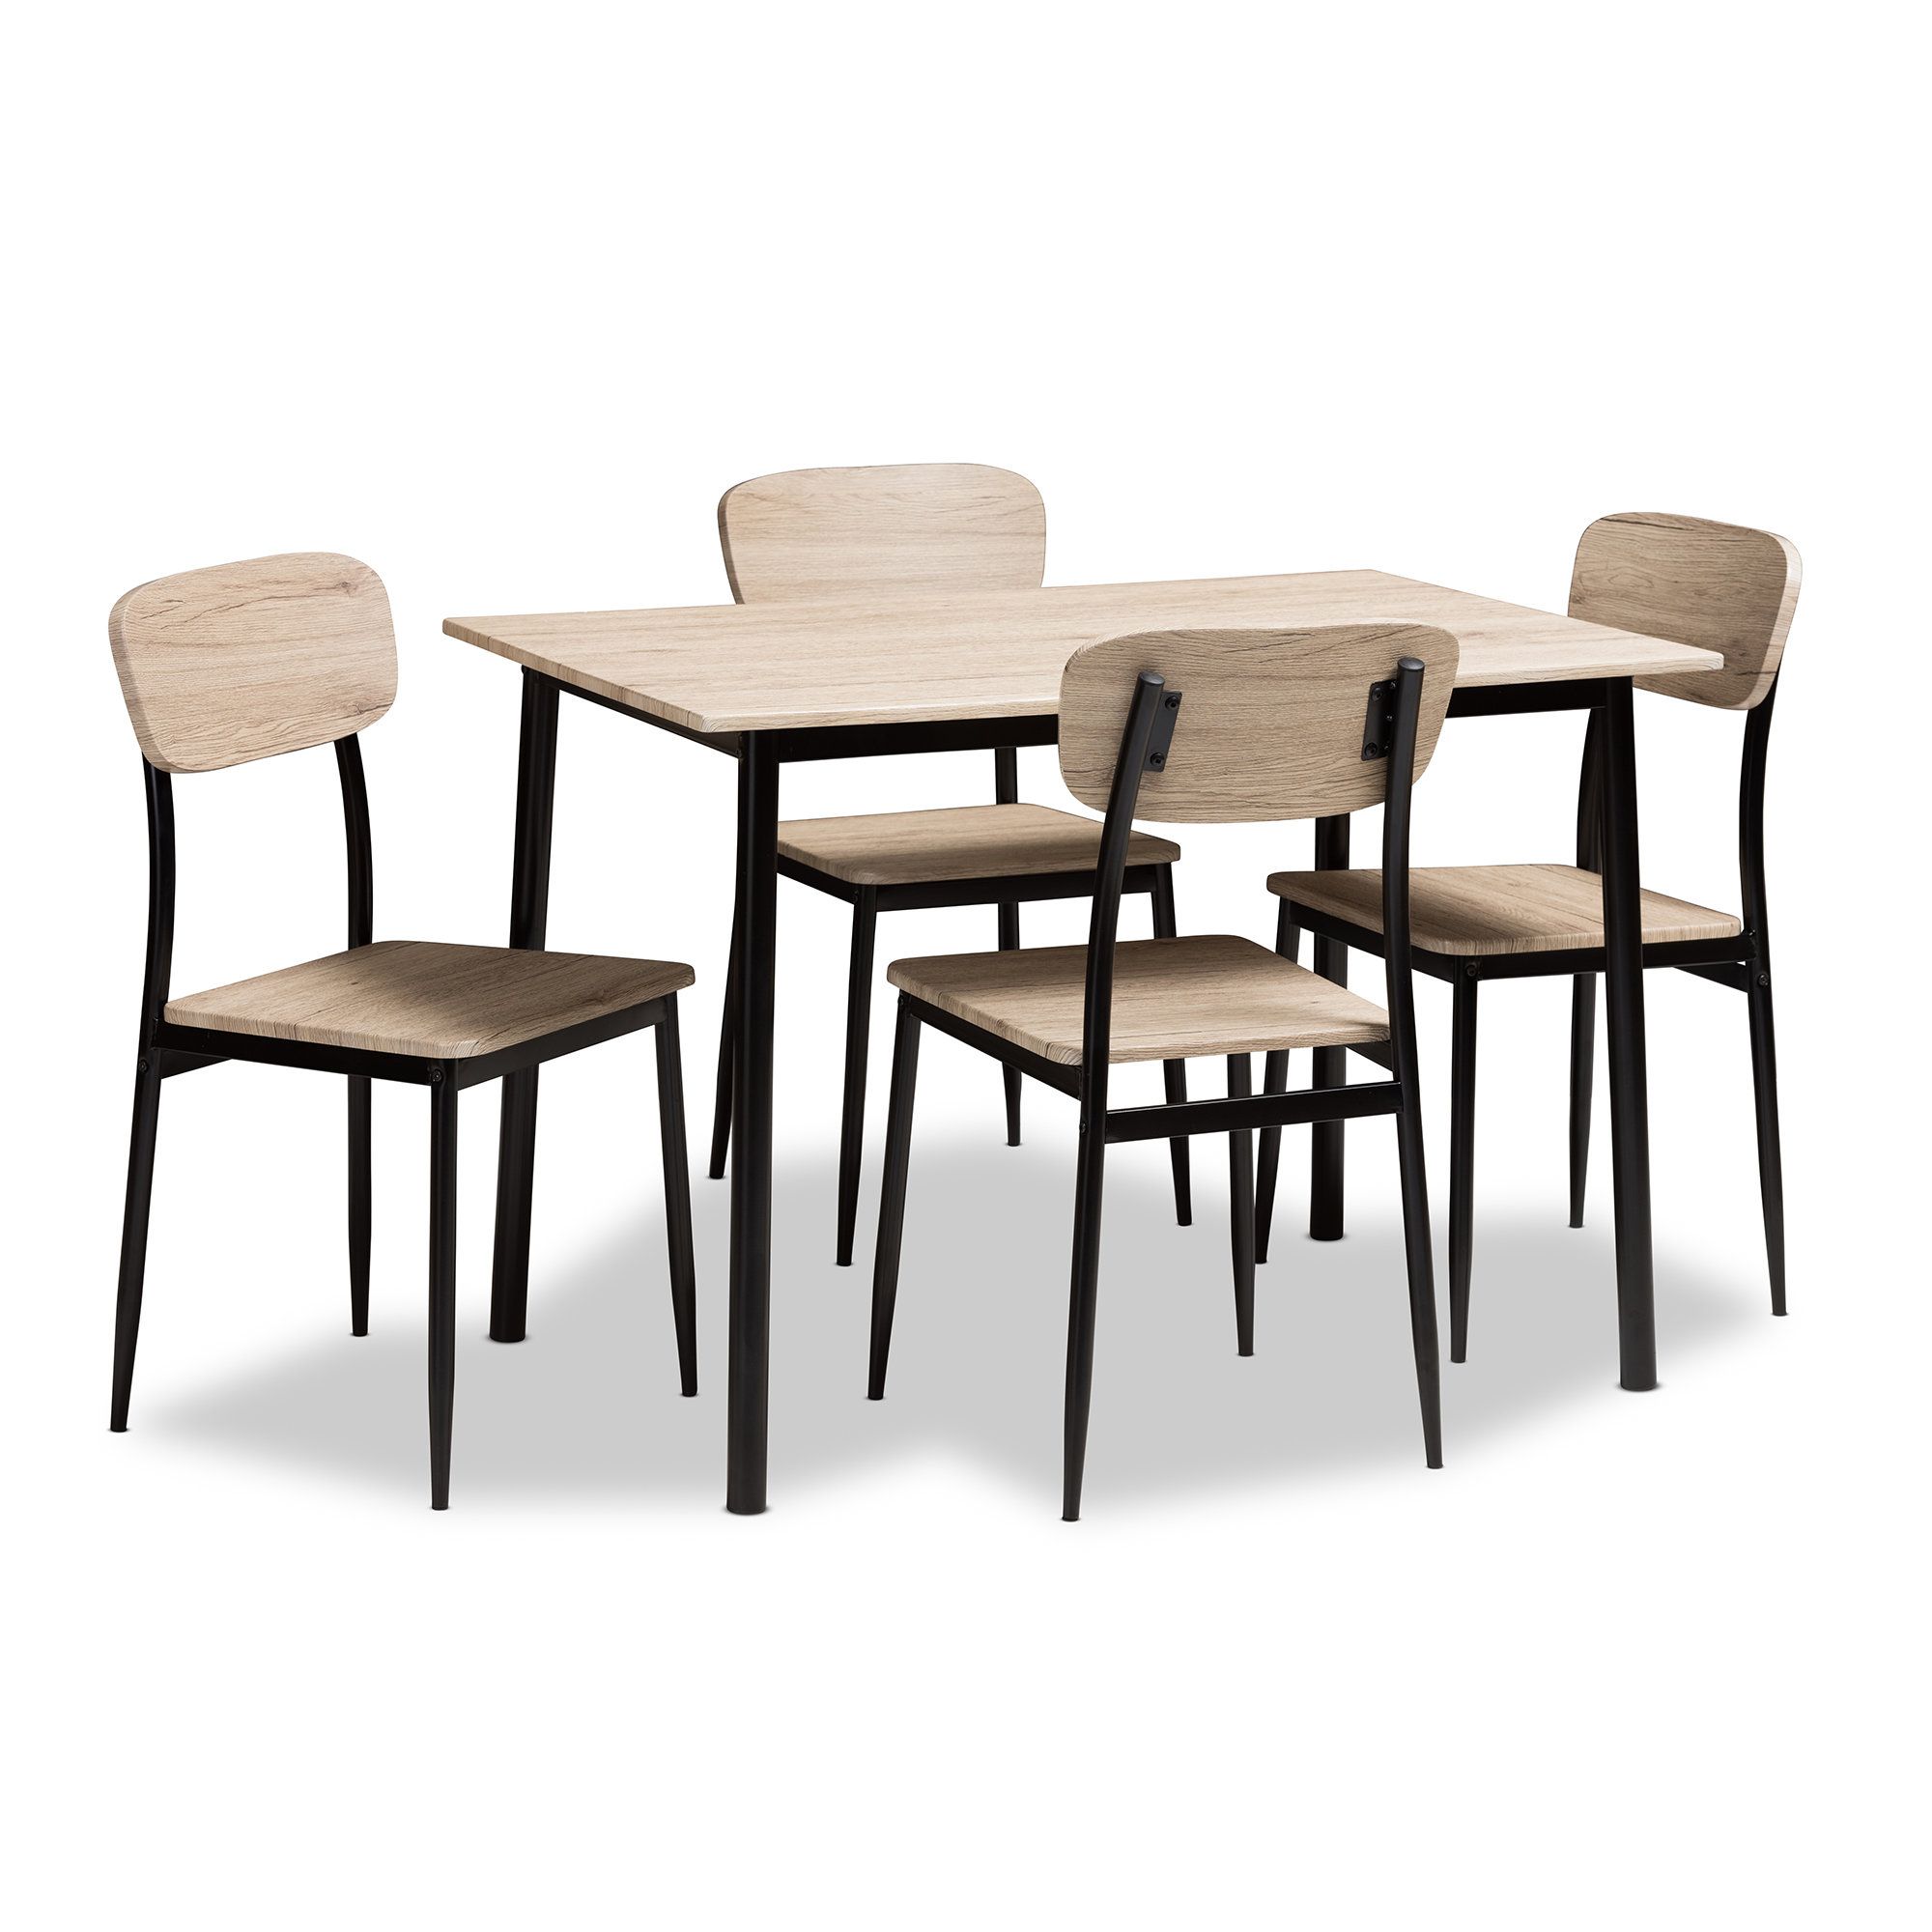 Newest Wiggs 5 Piece Dining Set For Wiggs 5 Piece Dining Sets (View 1 of 20)